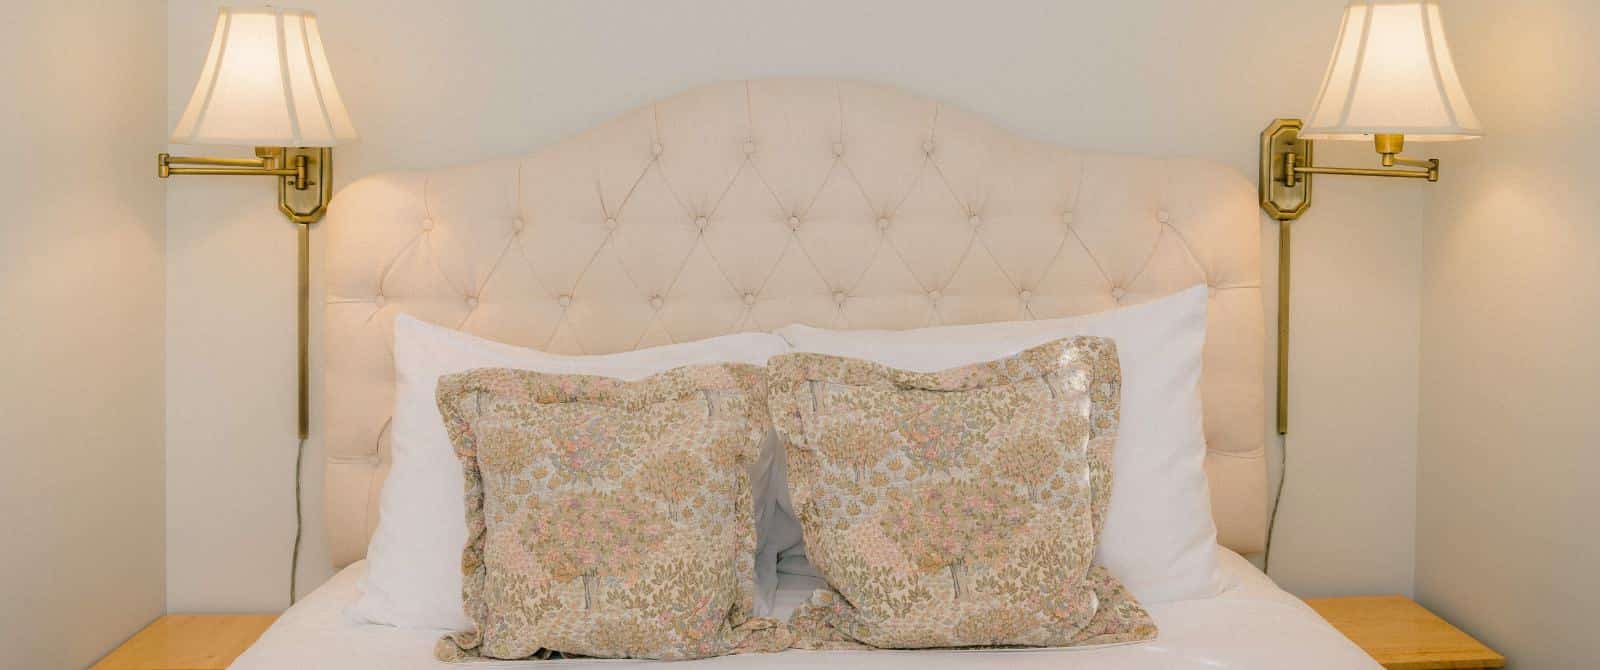 Close up view of bed with cream upholstered headboard, white bedding, and brass wall sconces